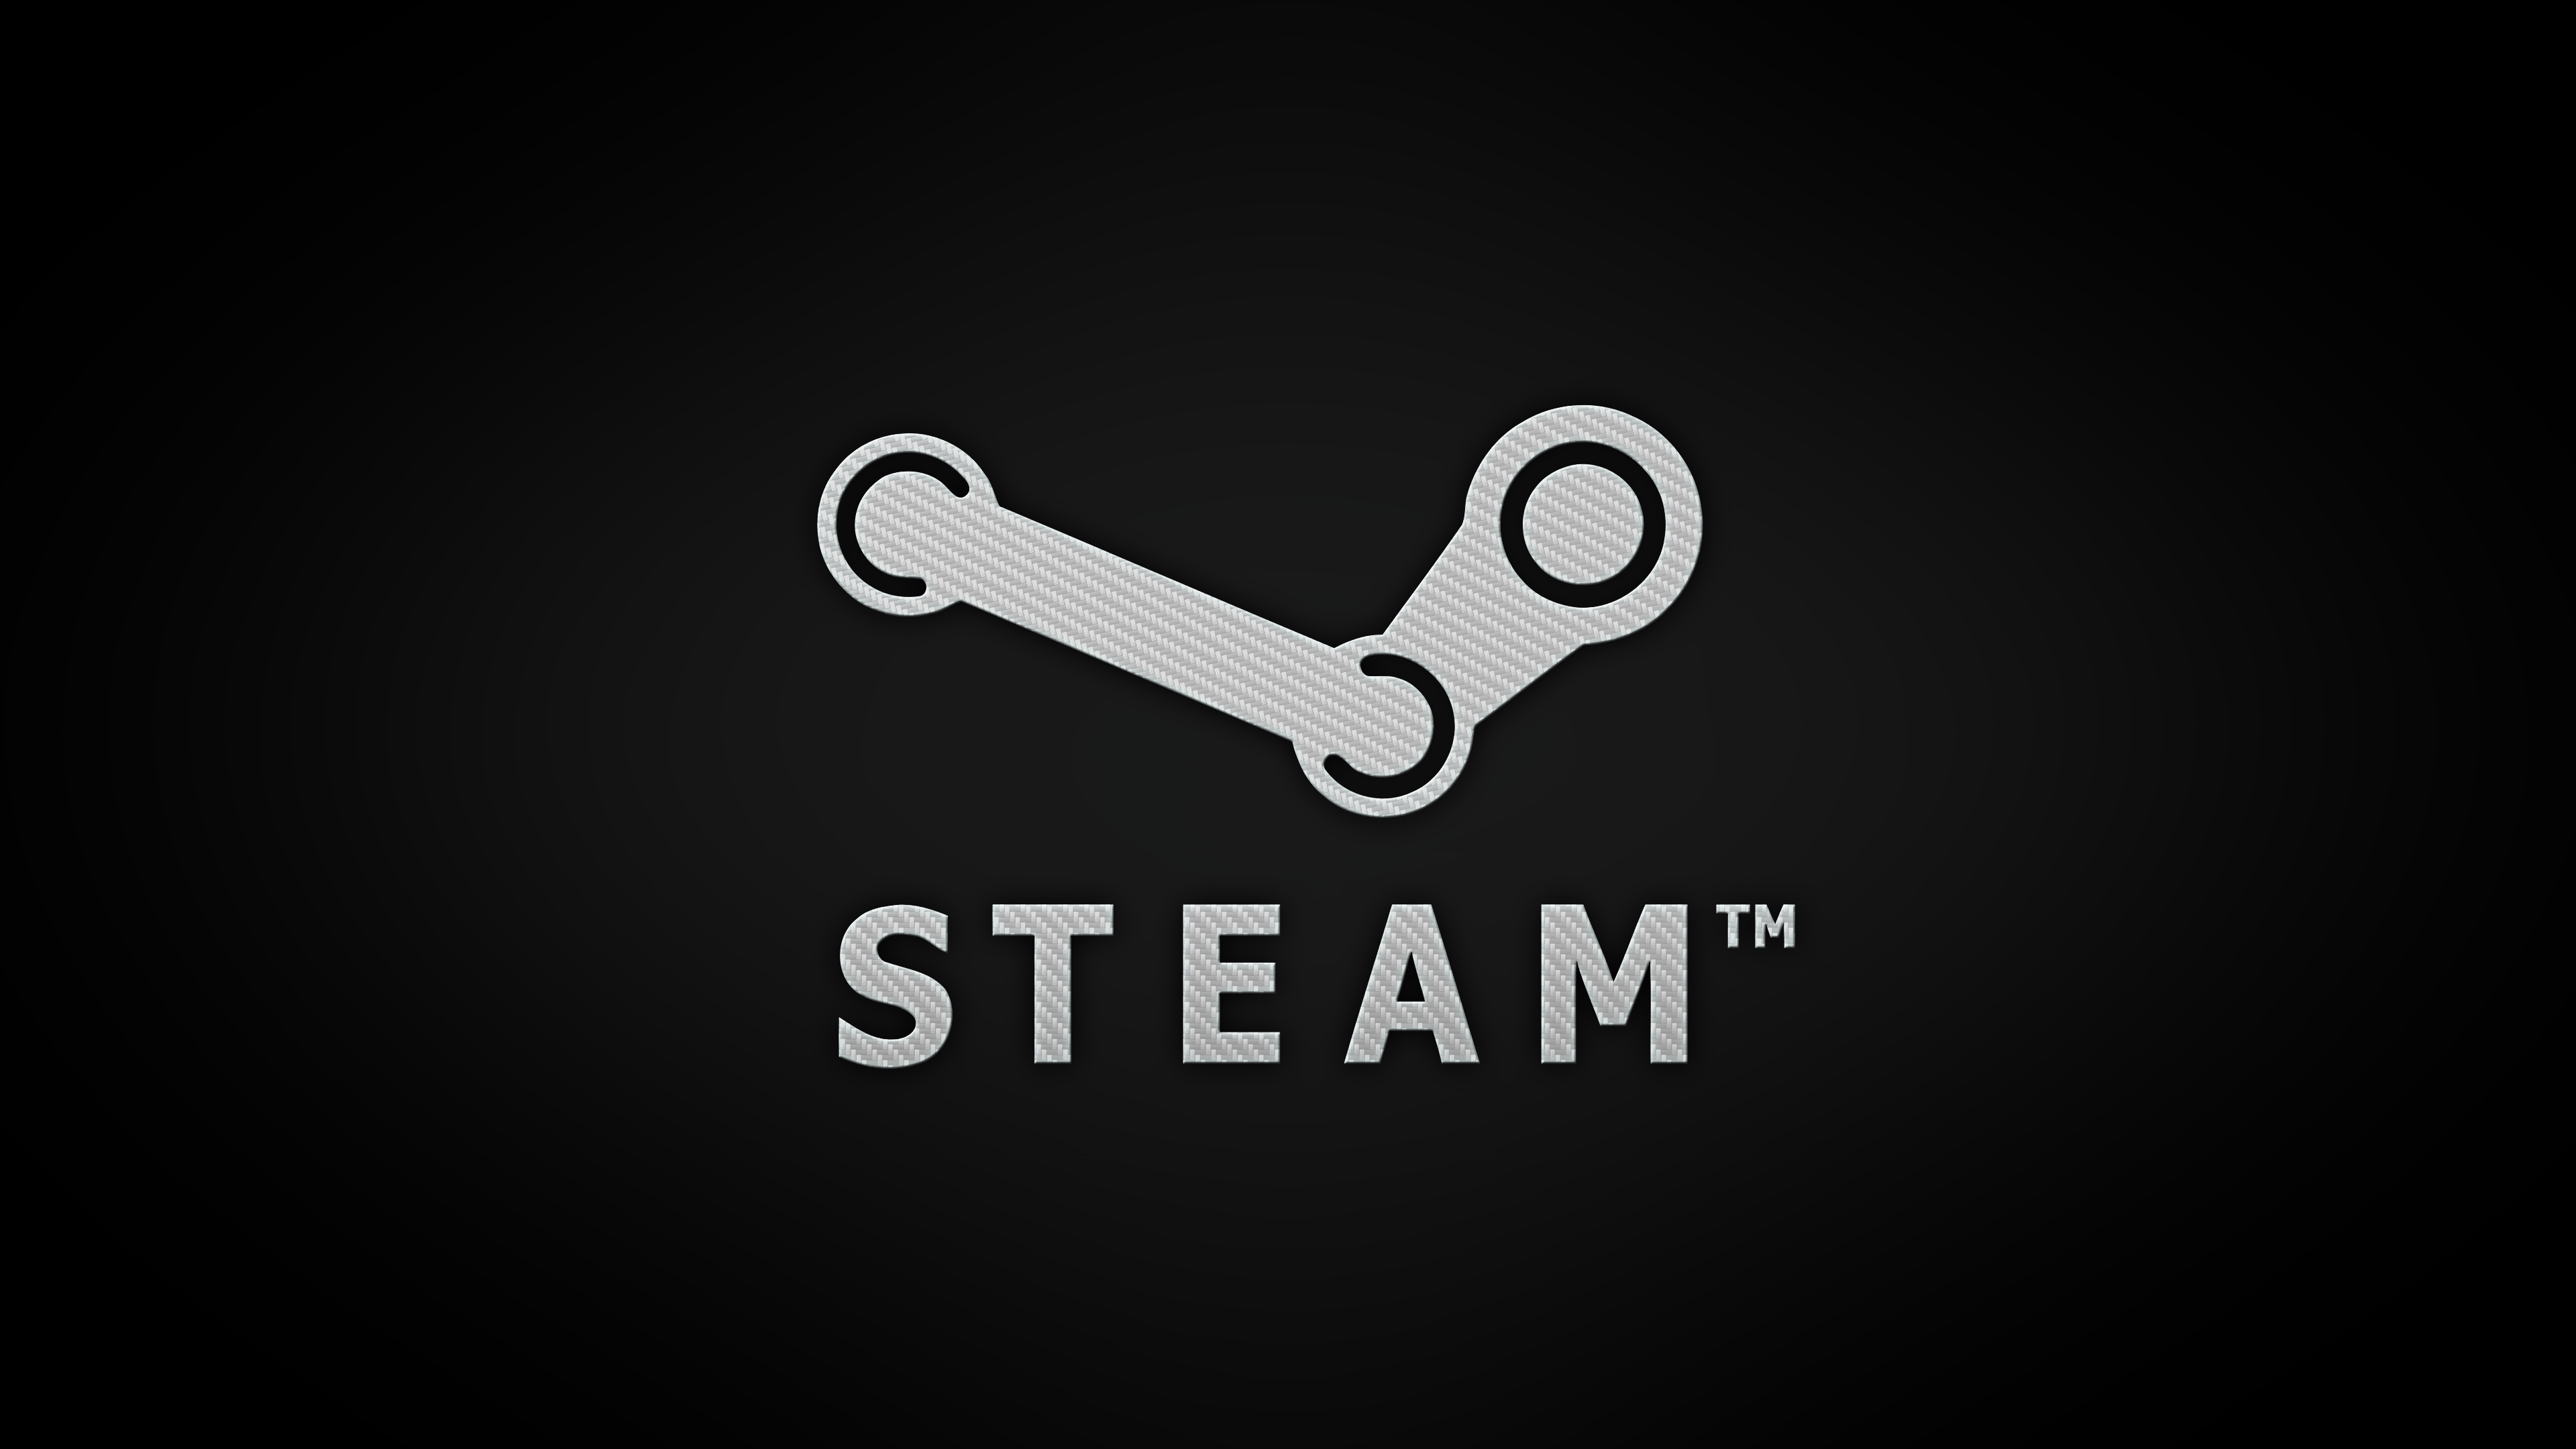 Gabe Newell Hinted PC-only Steam Games Coming to Consoles 